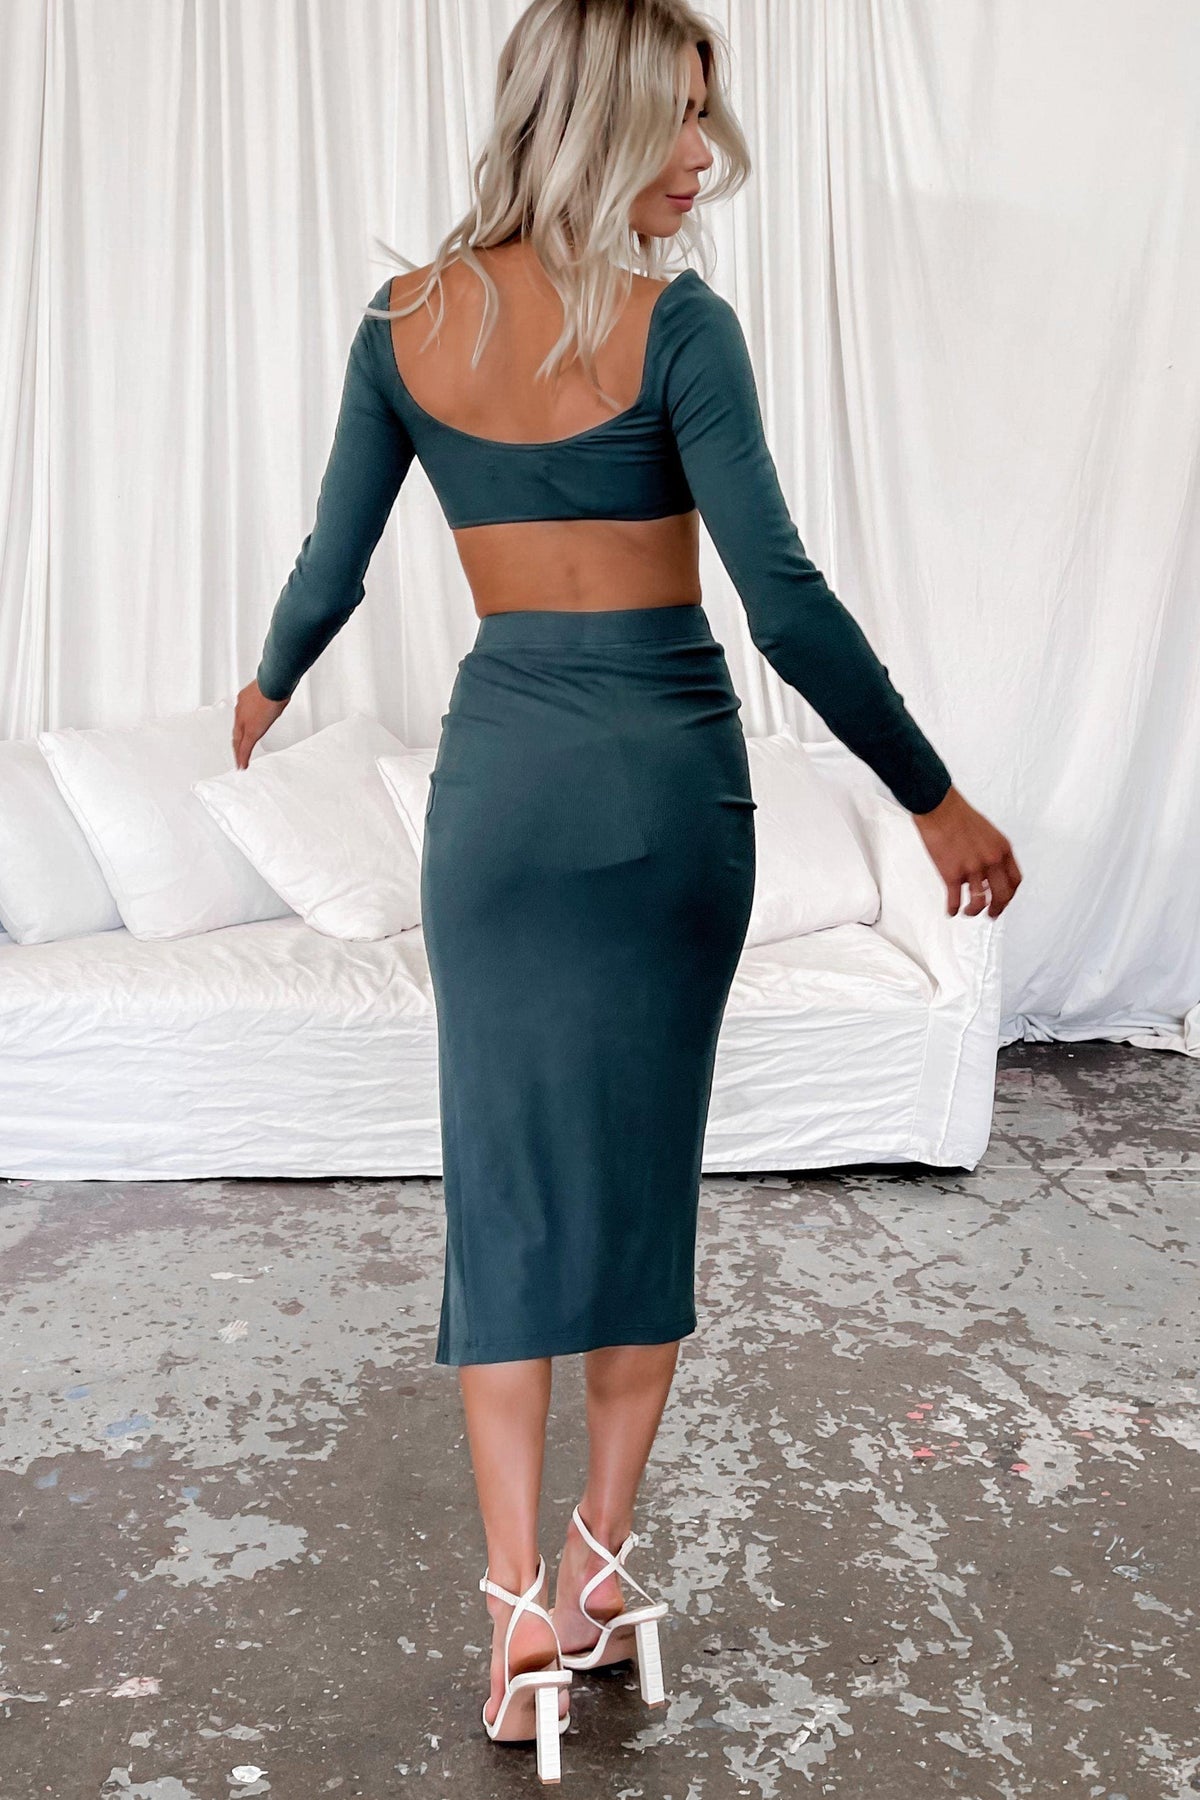 Purpose Top, CROP TOPS, GREEN, LONG SLEEVE, POLYESTER &amp; SPANDEX, POLYESTER AND SPANDEX, Sale, SPANDEX &amp; POLYESTER, SPANDEX AND POLYESTER, TOP, TOPS, Our New Purpose Top Is Now Only $43.00 Exclusive At Mishkah, Our New Purpose Top is now only $43.00-We Have The Latest Women&#39;s Tops @ Mishkah Online Fashion Boutique-MISHKAH